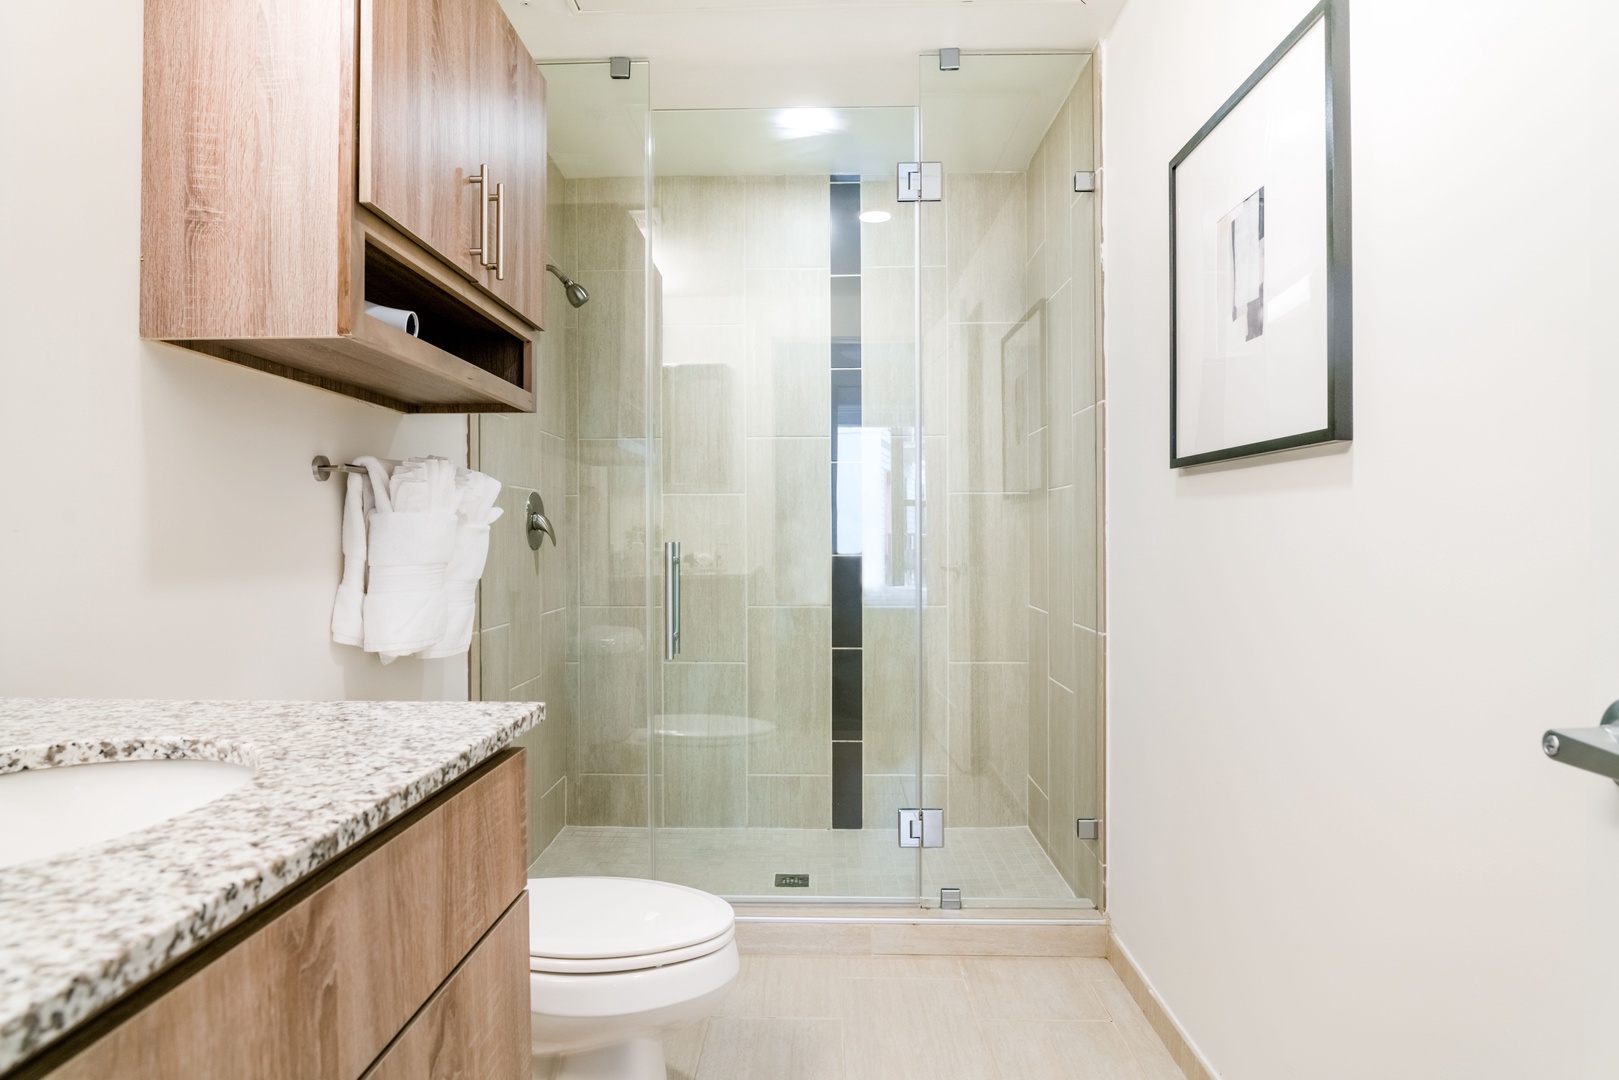 Get ready to conquer the day in the contemporary walk-in shower with stylish fixtures.